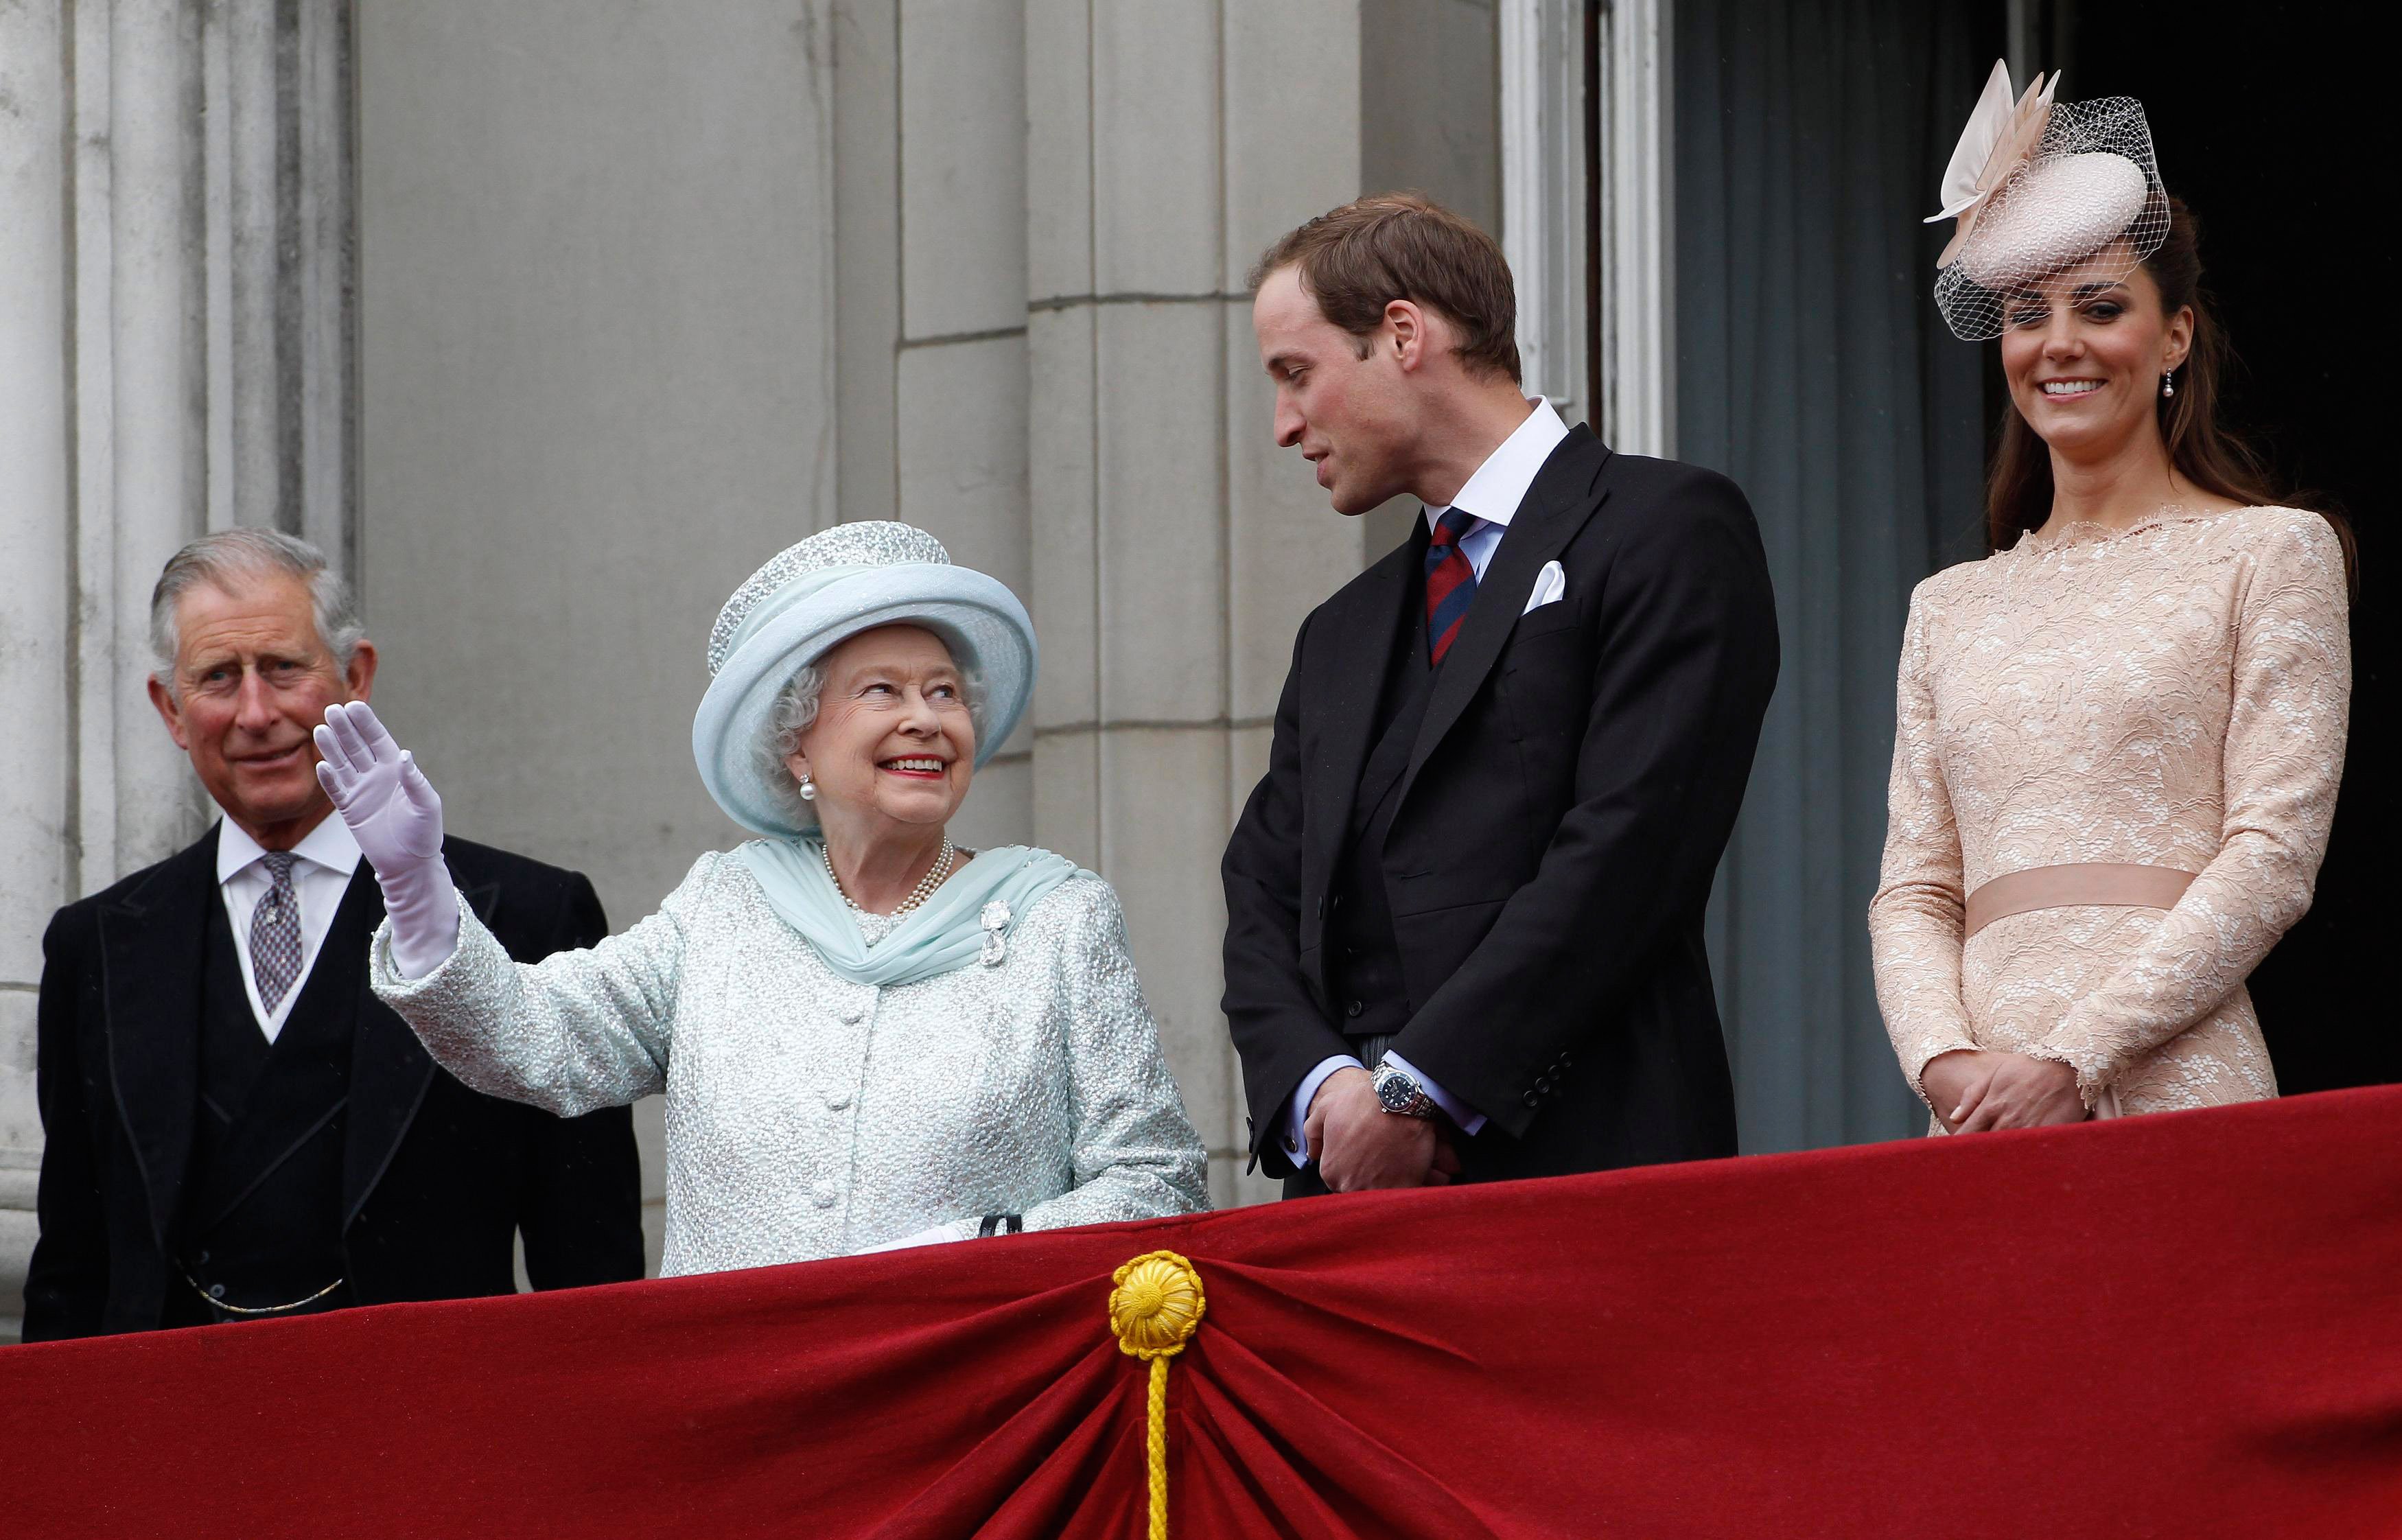 Prince Charles, Queen Elizabeth II, Prince William and Kate Middleton on the balcony of Buckingham Palace during the finale of the Queen's Diamond Jubilee celebrations on June 5, 2012 in London, England ┃Source: Getty Images